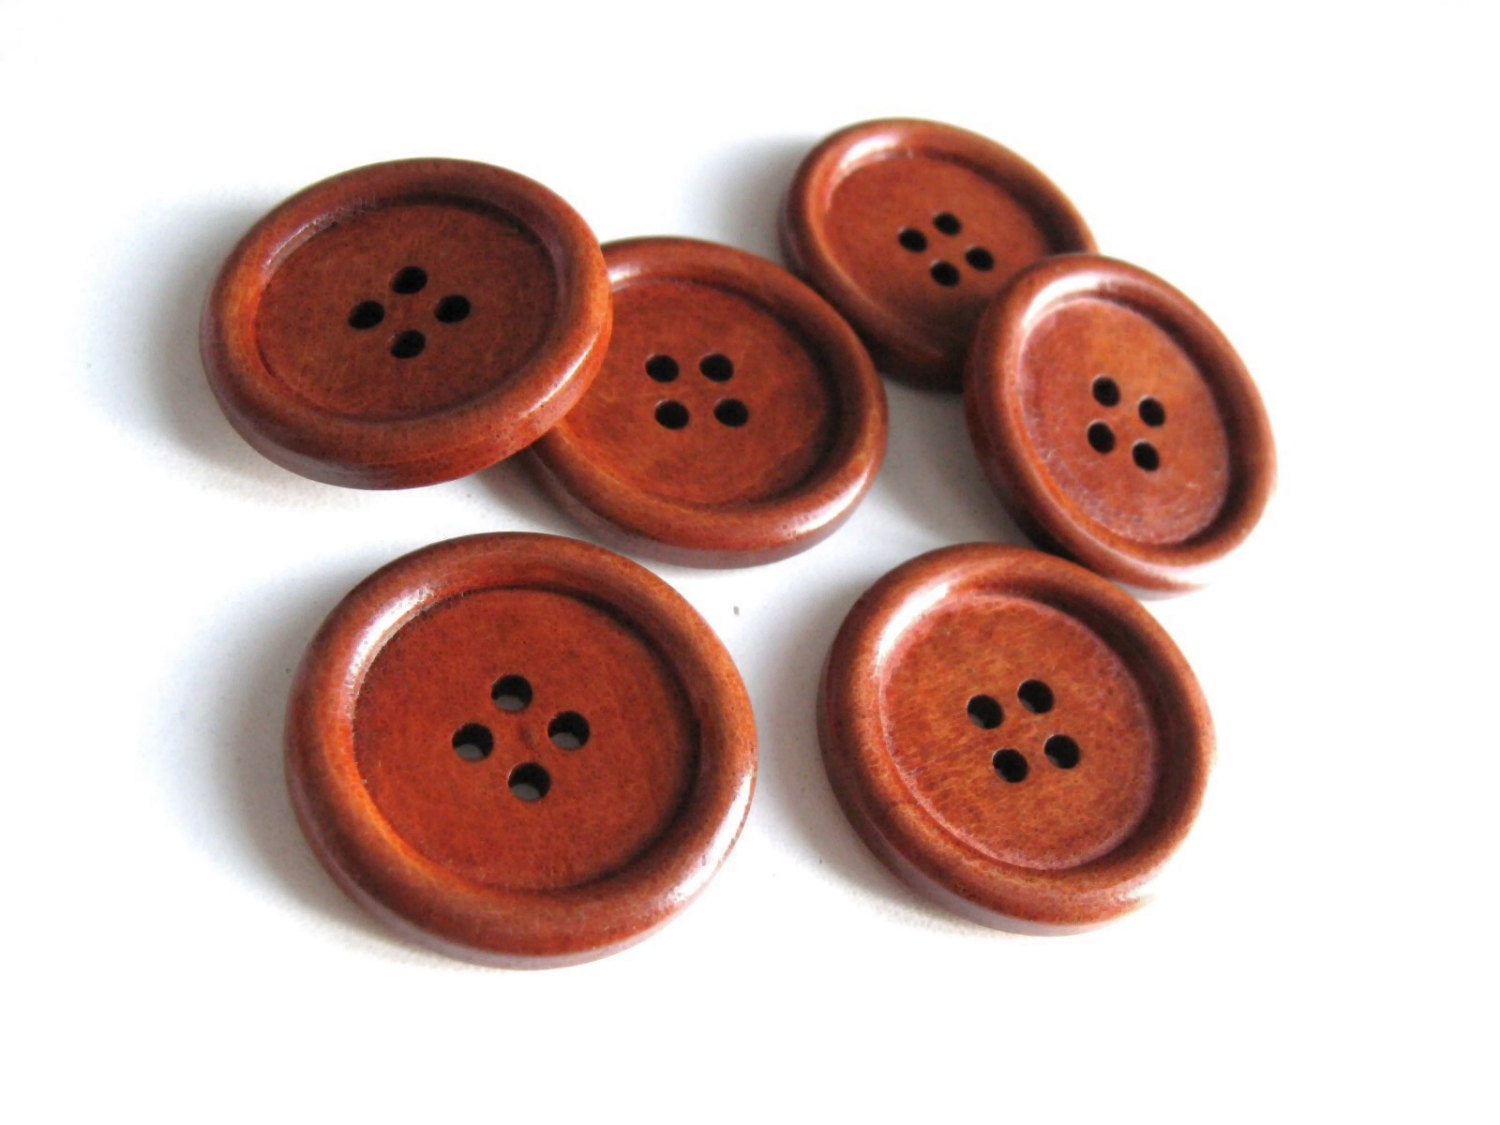 Maroon brown Wooden Sewing Buttons 30mm - set of 6 natural wood button